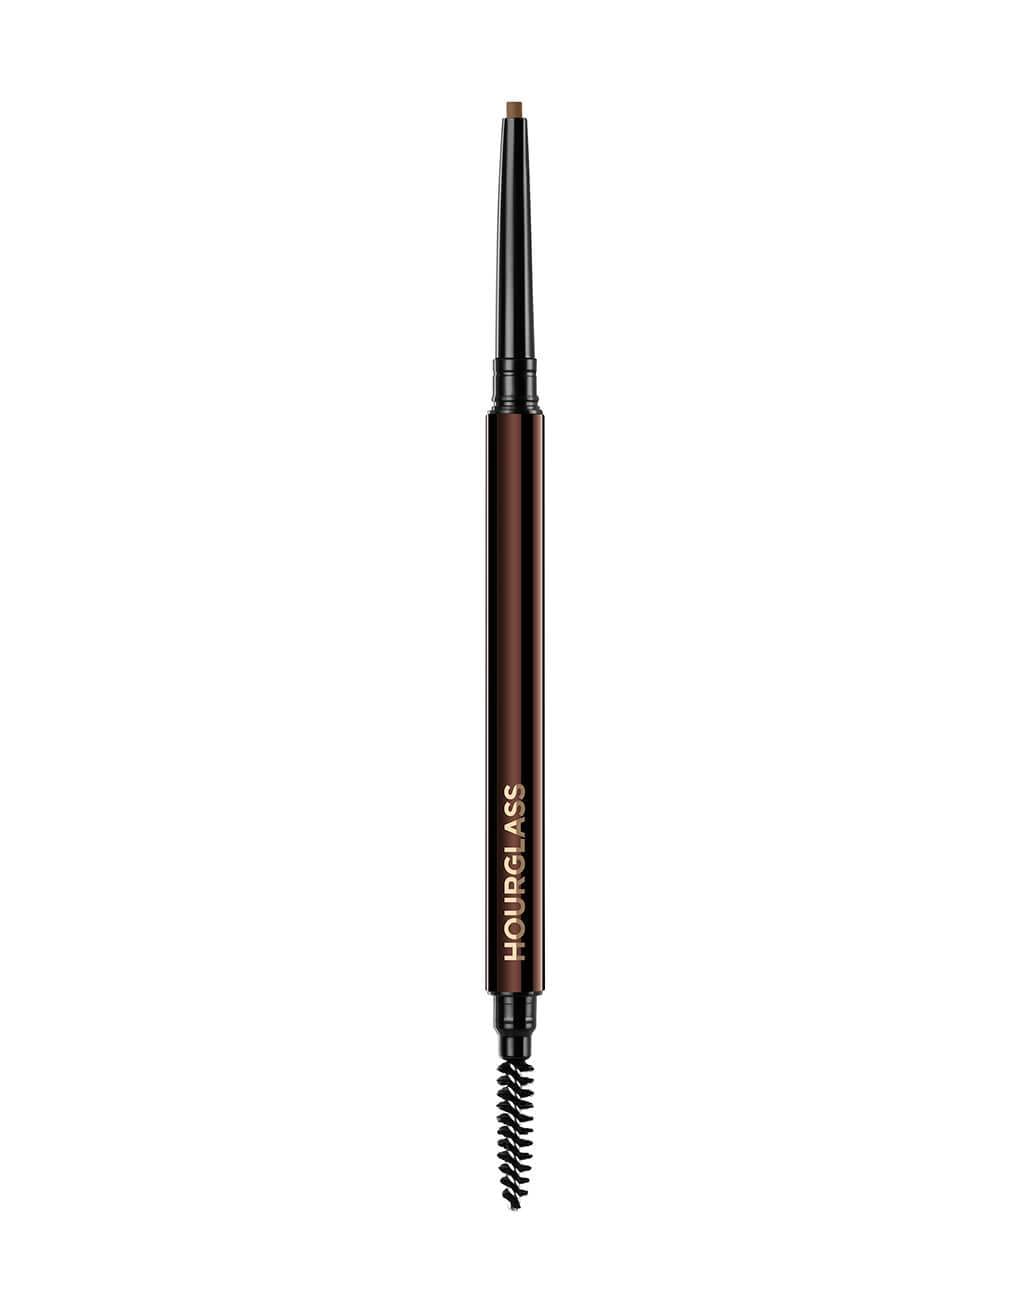 Hourglass Arch Brow Sculpting Pencil. Platinum Blonde Shade Mechanical Eyebrow Pencil for Shaping and Filling